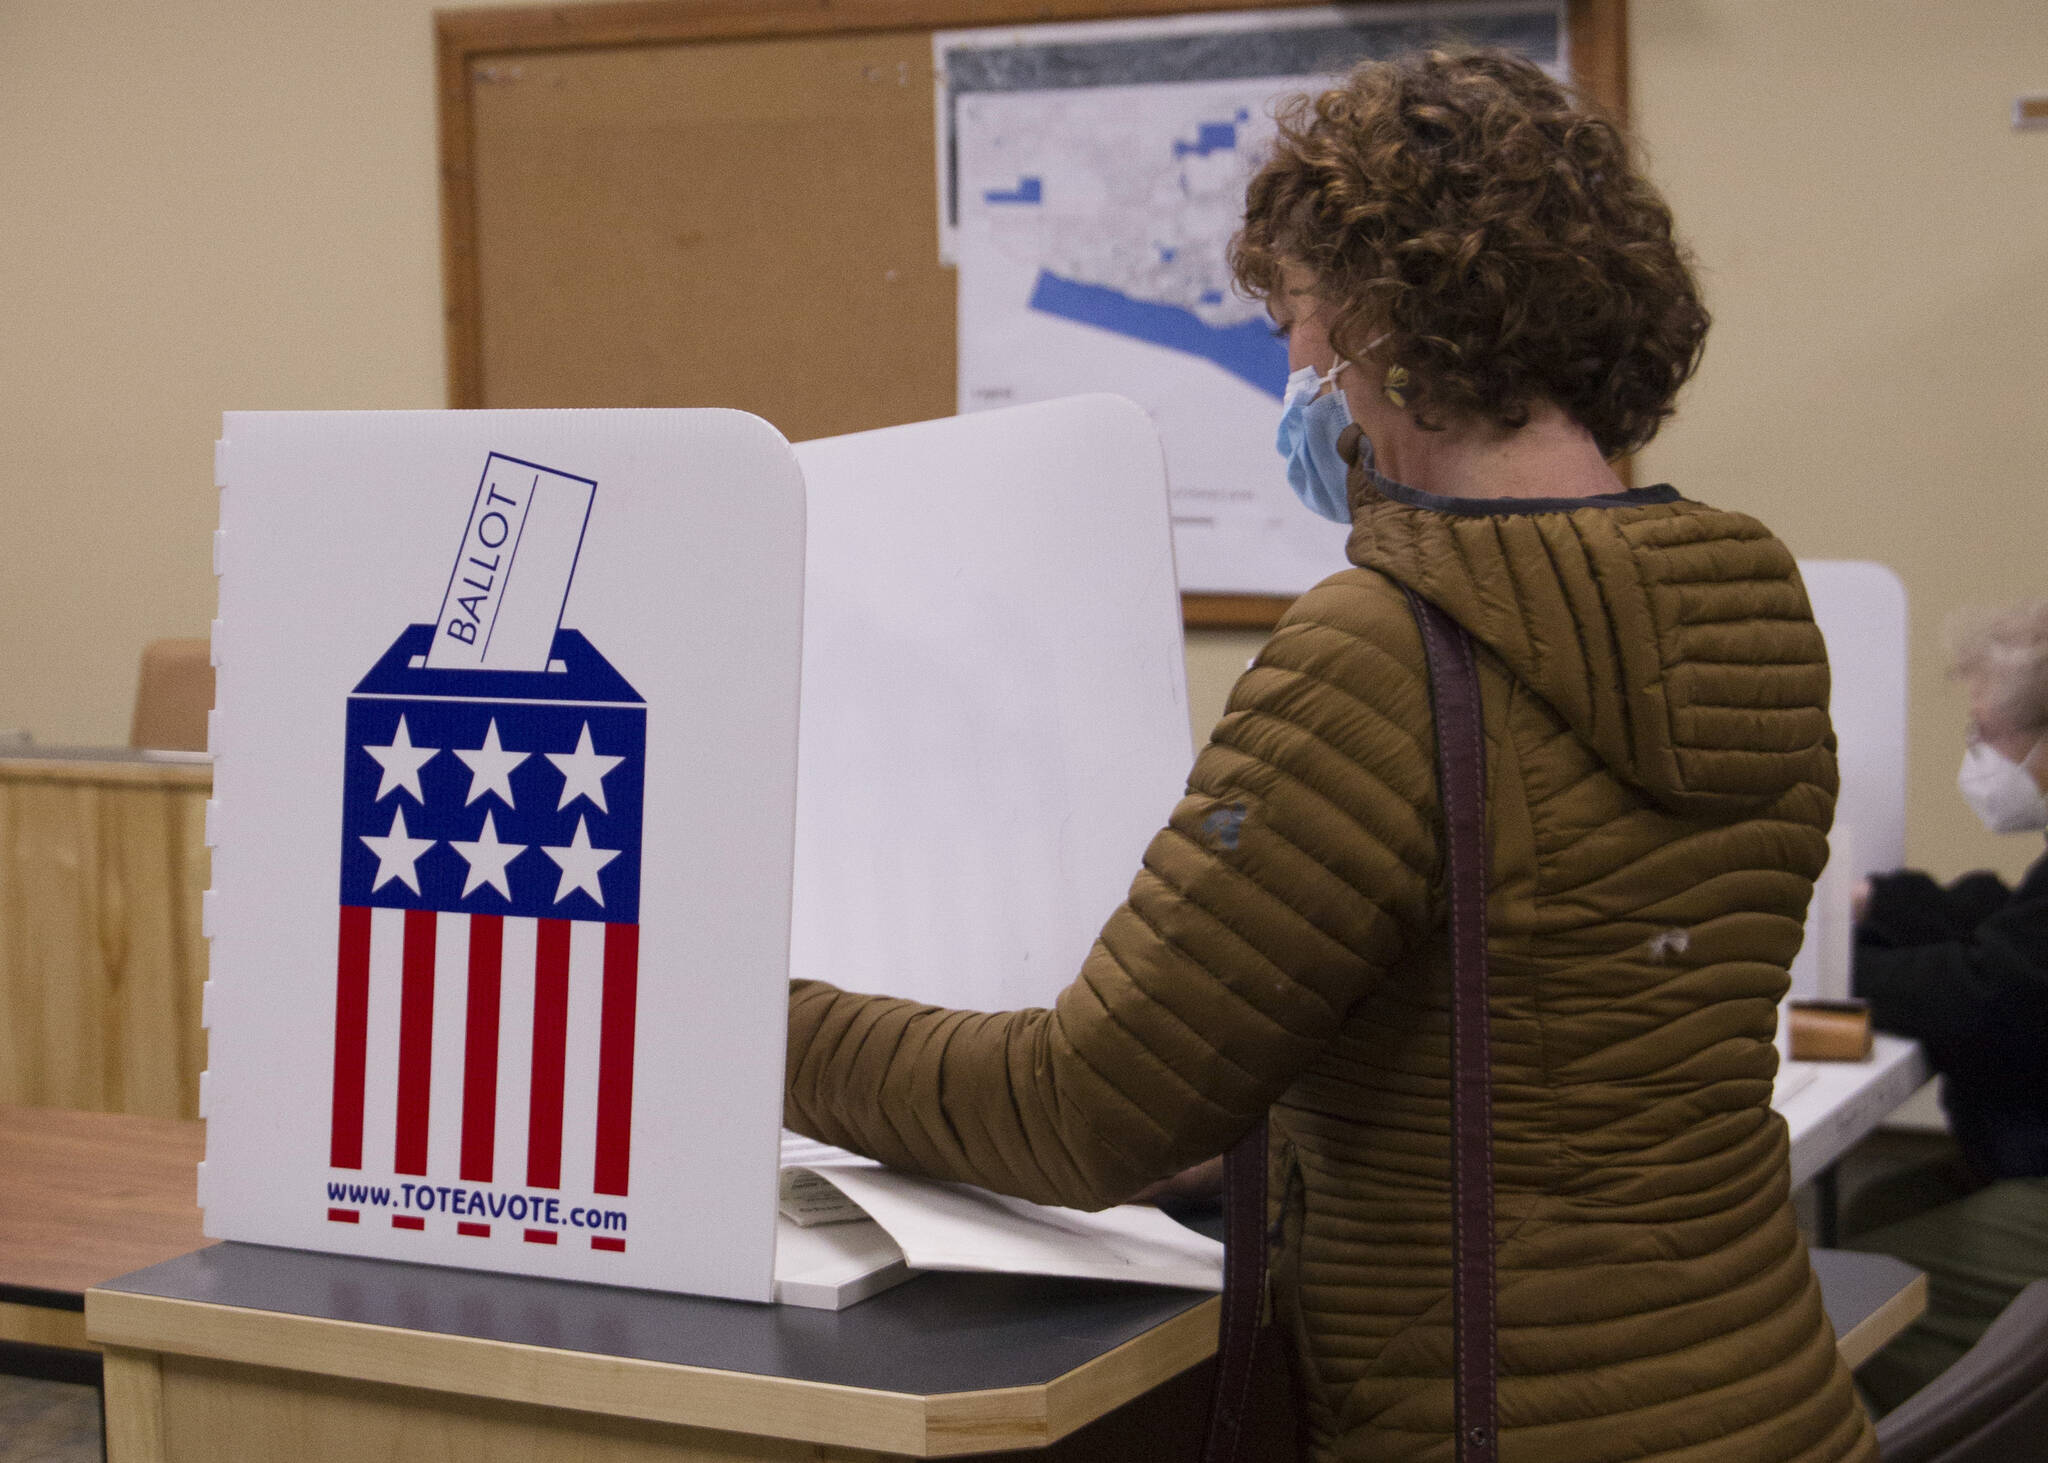 A voter at city hall reviews their ballot before submitting it on Oct. 5. (Photo by Sarah Knapp/Homer News)